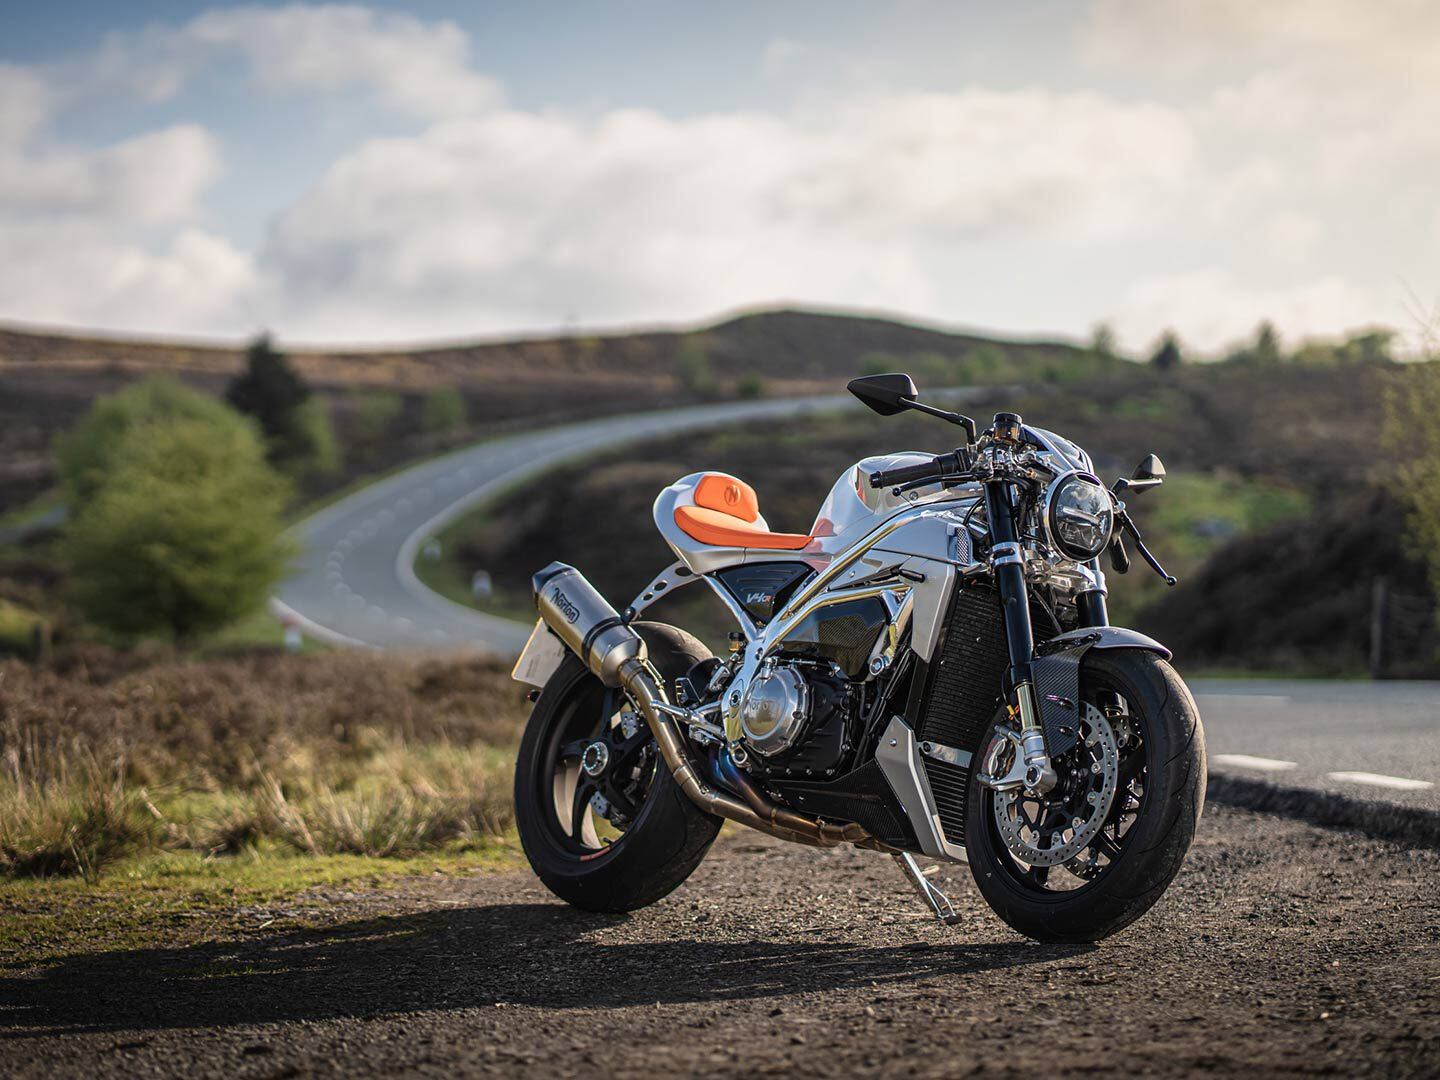 Norton will produce 200 examples of the hand-built V4CR initially only for the UK market.